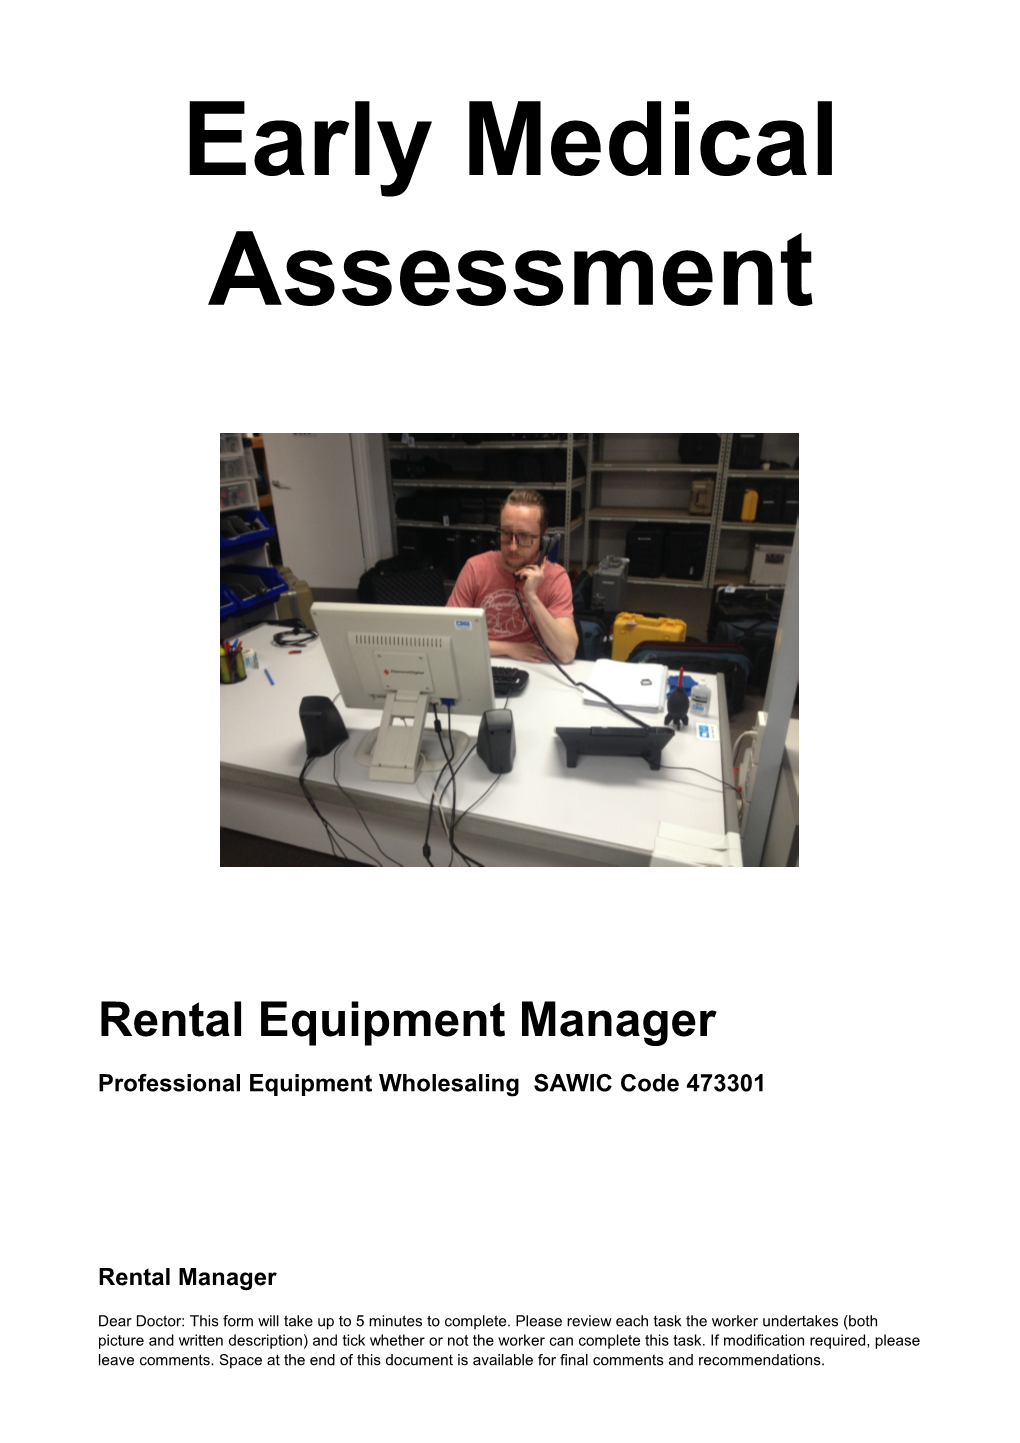 Professional Equipment Wholesale - Rental Manager